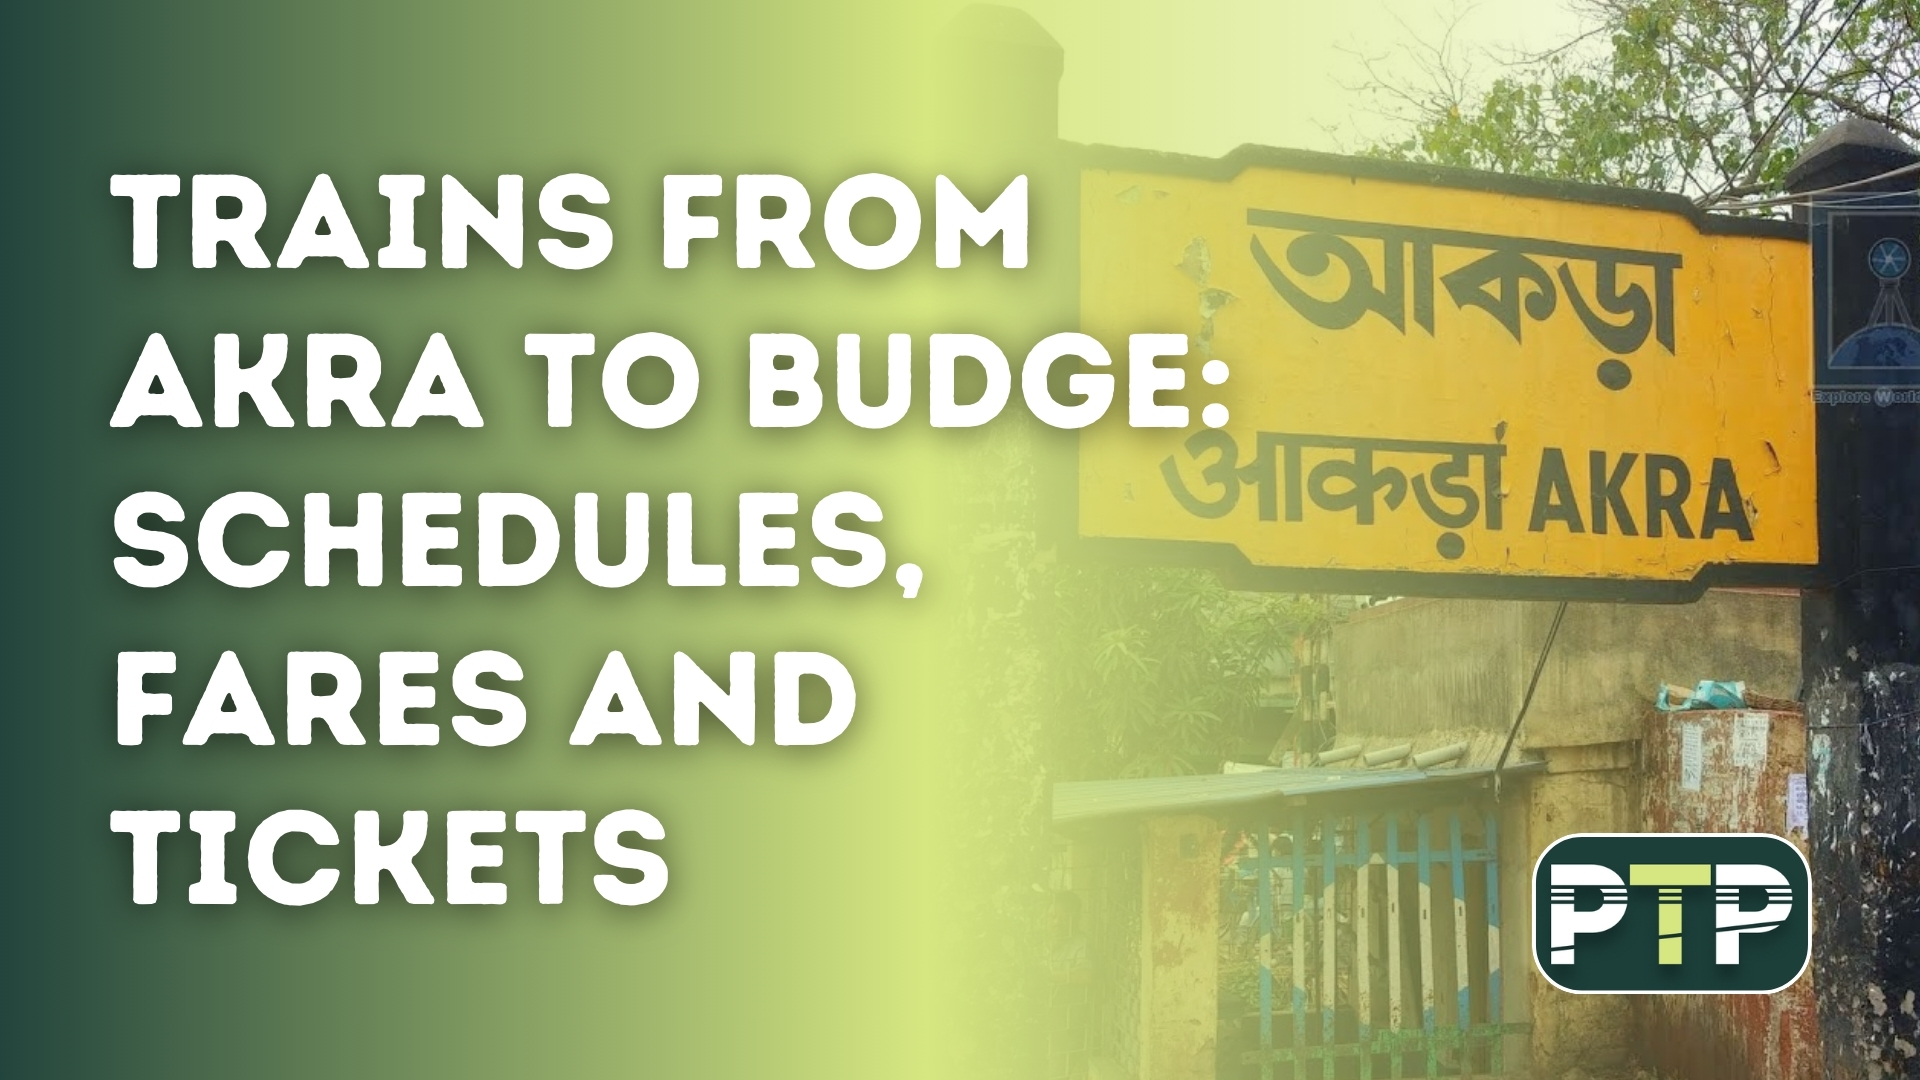 Trains from Akra to Budge Schedules, Fares and Tickets